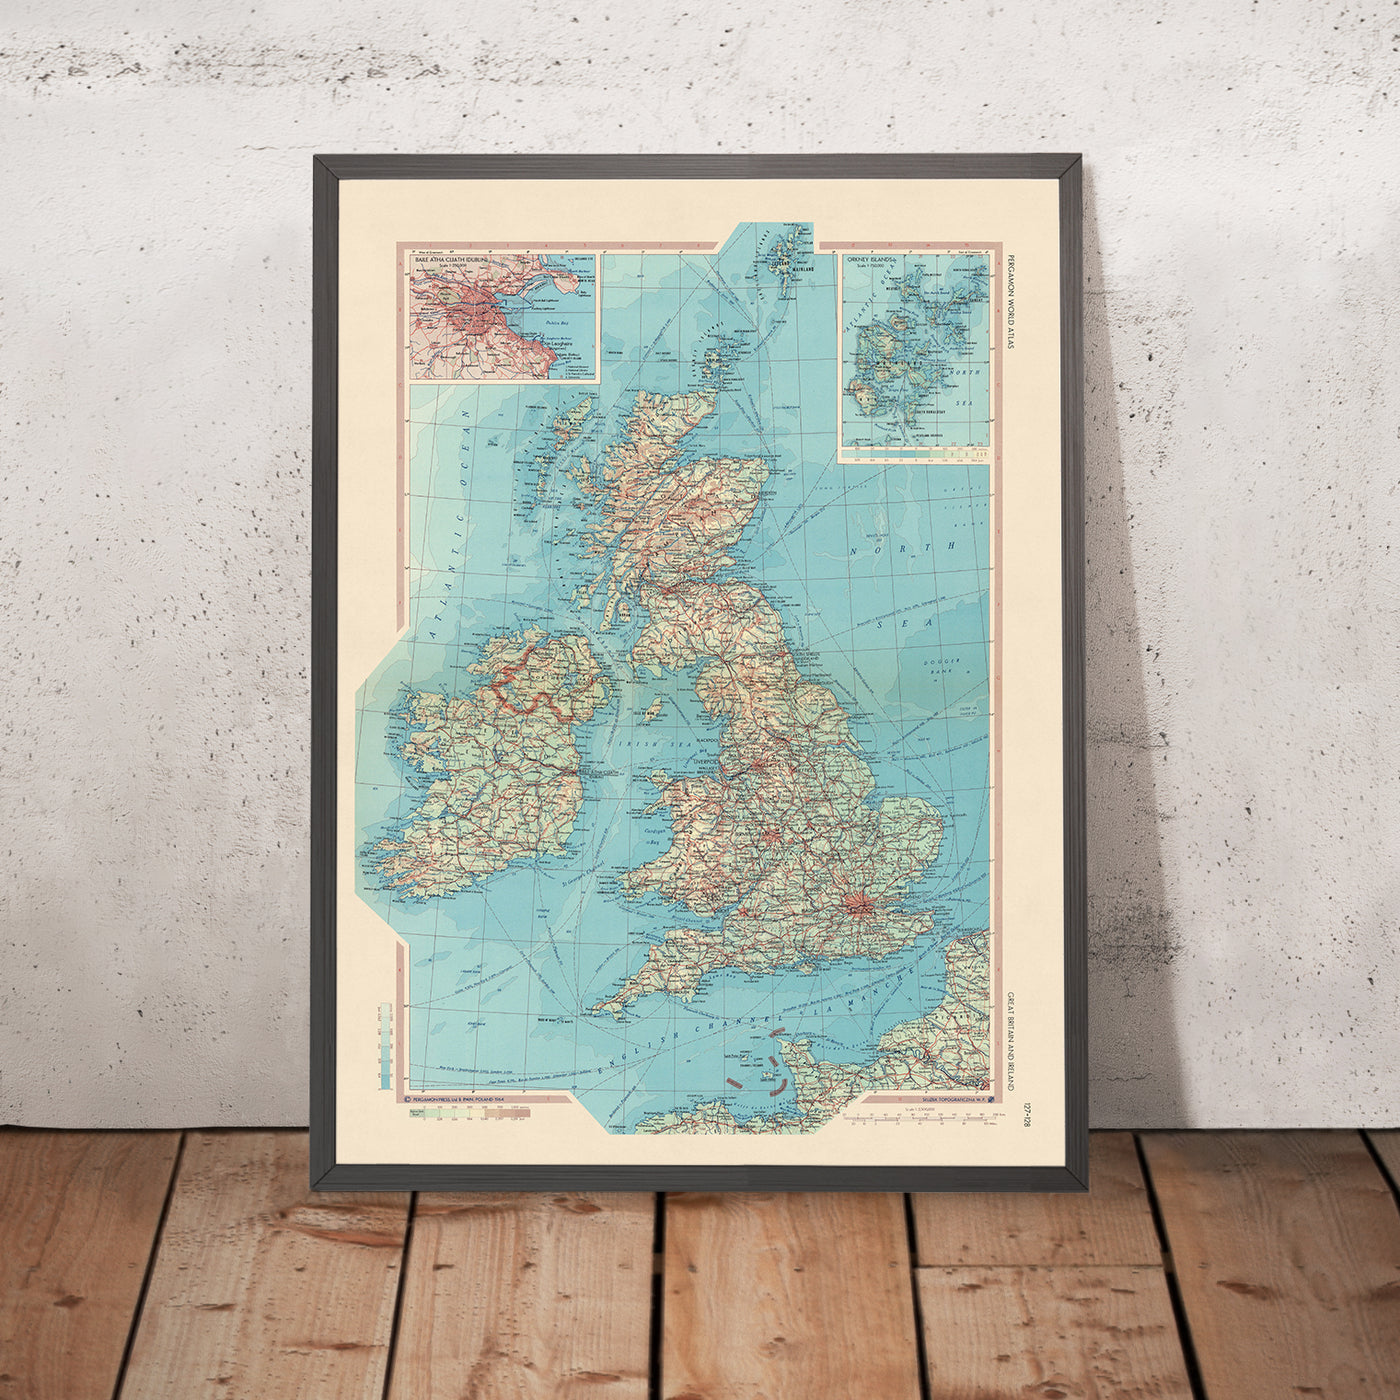 Old Map of Great Britain and Ireland, 1967: London, Glasgow, Edinburgh, Snowdonia National Park, River Thames